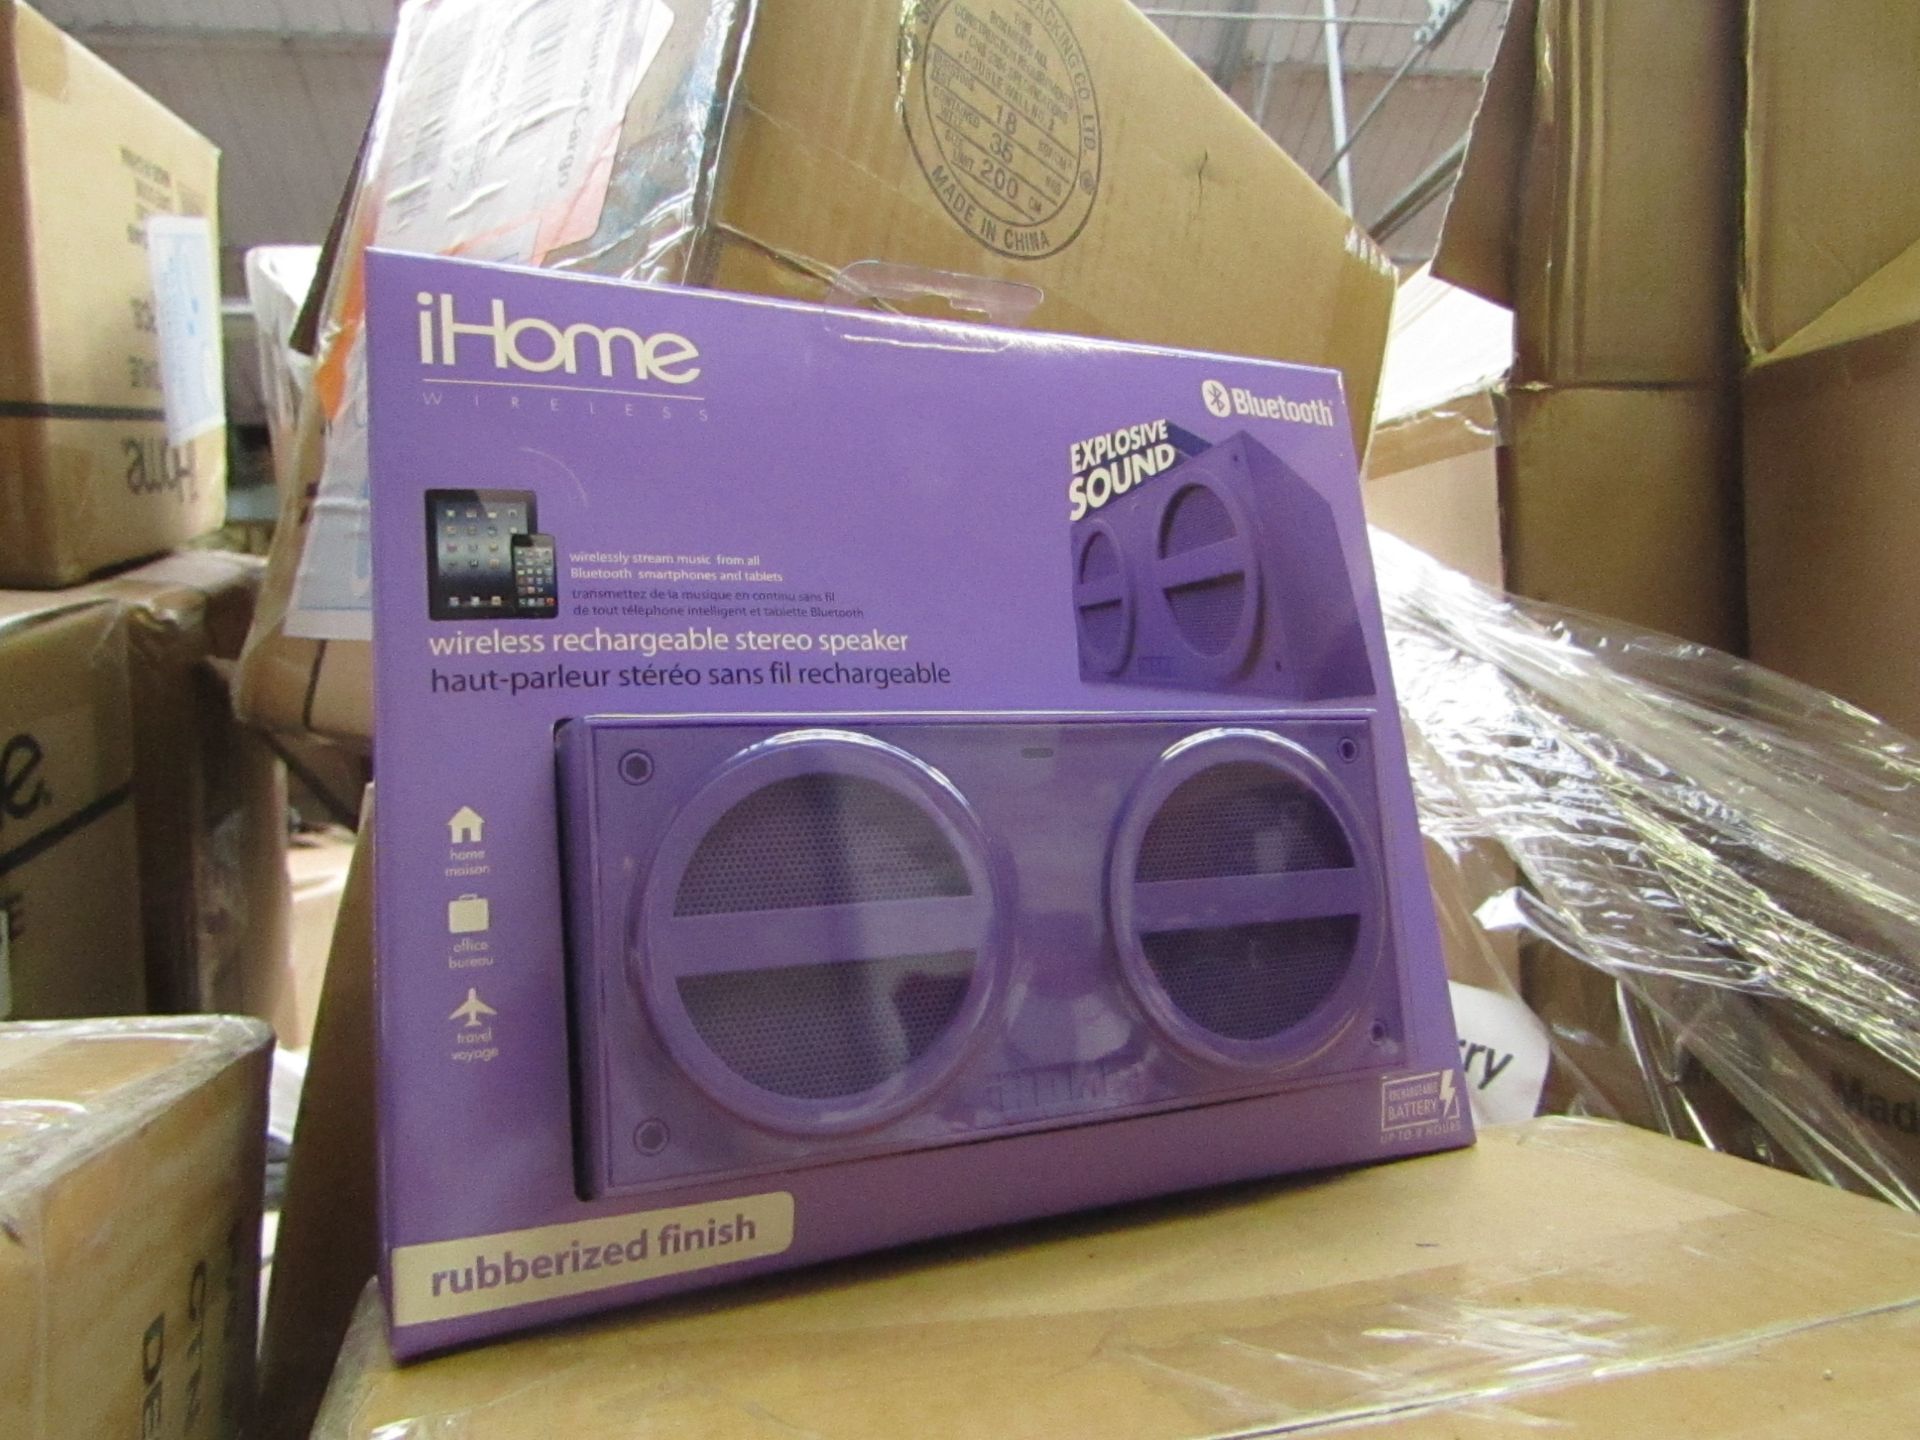 iHome, Wireless Rechargeable Stereo Speaker, New and Boxed